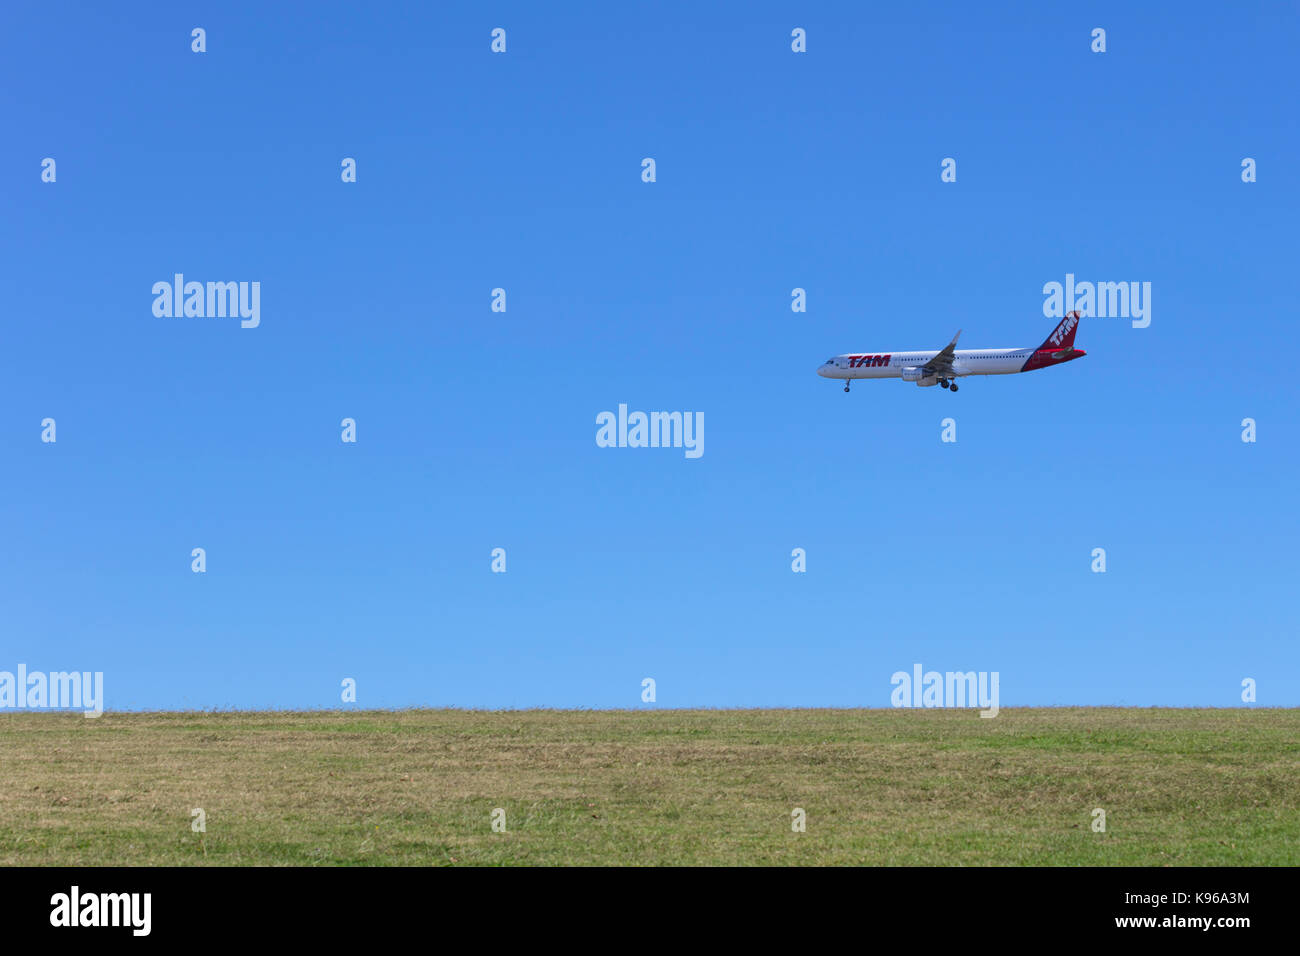 Tam airplane ready for landing. Buenos Aires, Argentina. Stock Photo